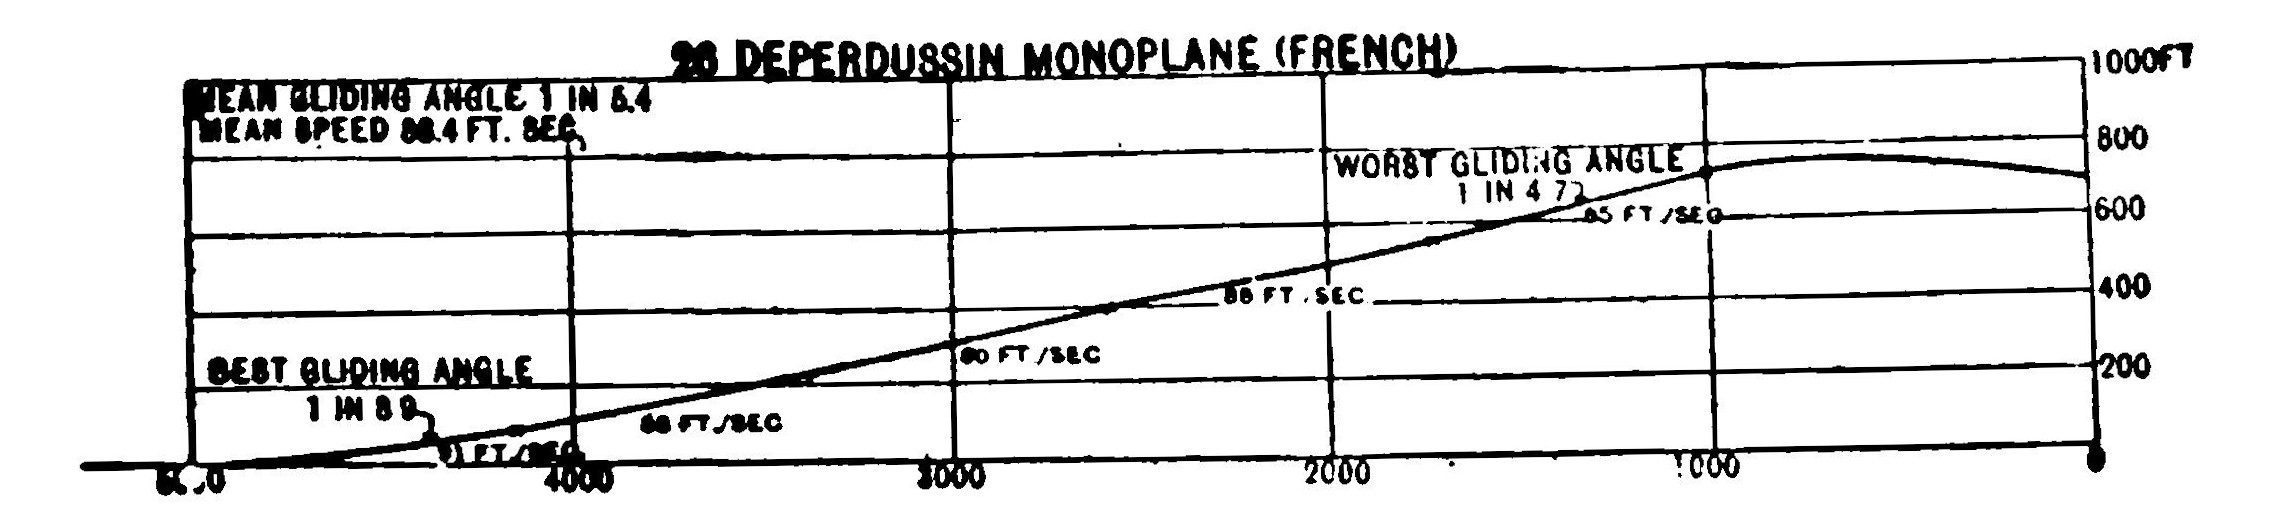 Typical Gliding Angle Diagram Showing Path Inclination of Deperdussin Monoplane.